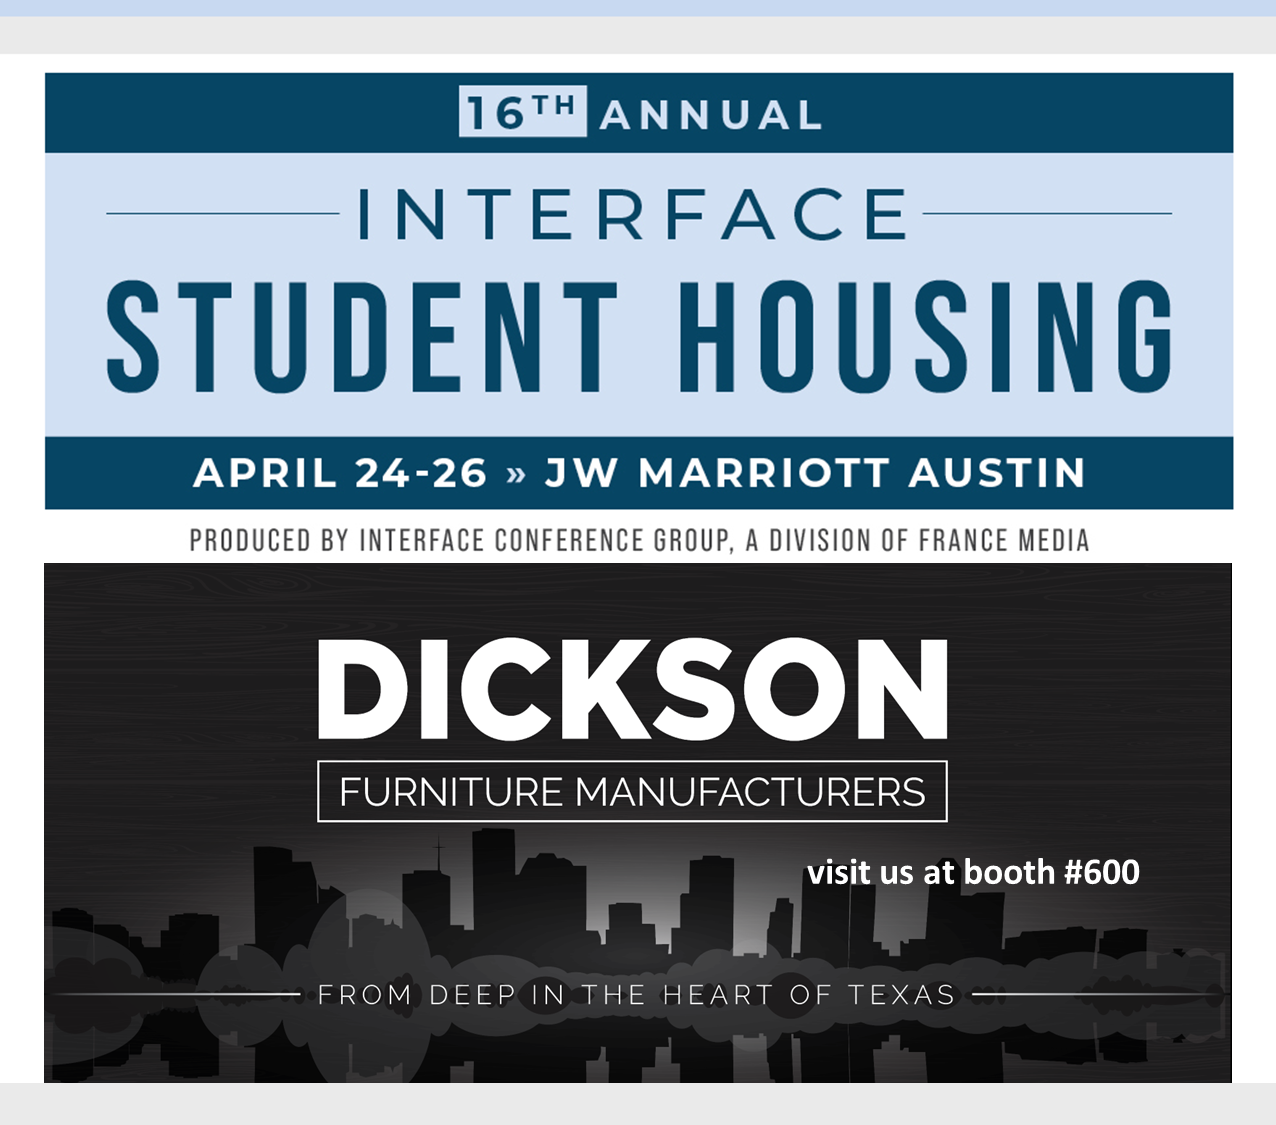 Dickson attending the Interface Student Housing convention by France Media in Austin, Texas this April.  Come see us.